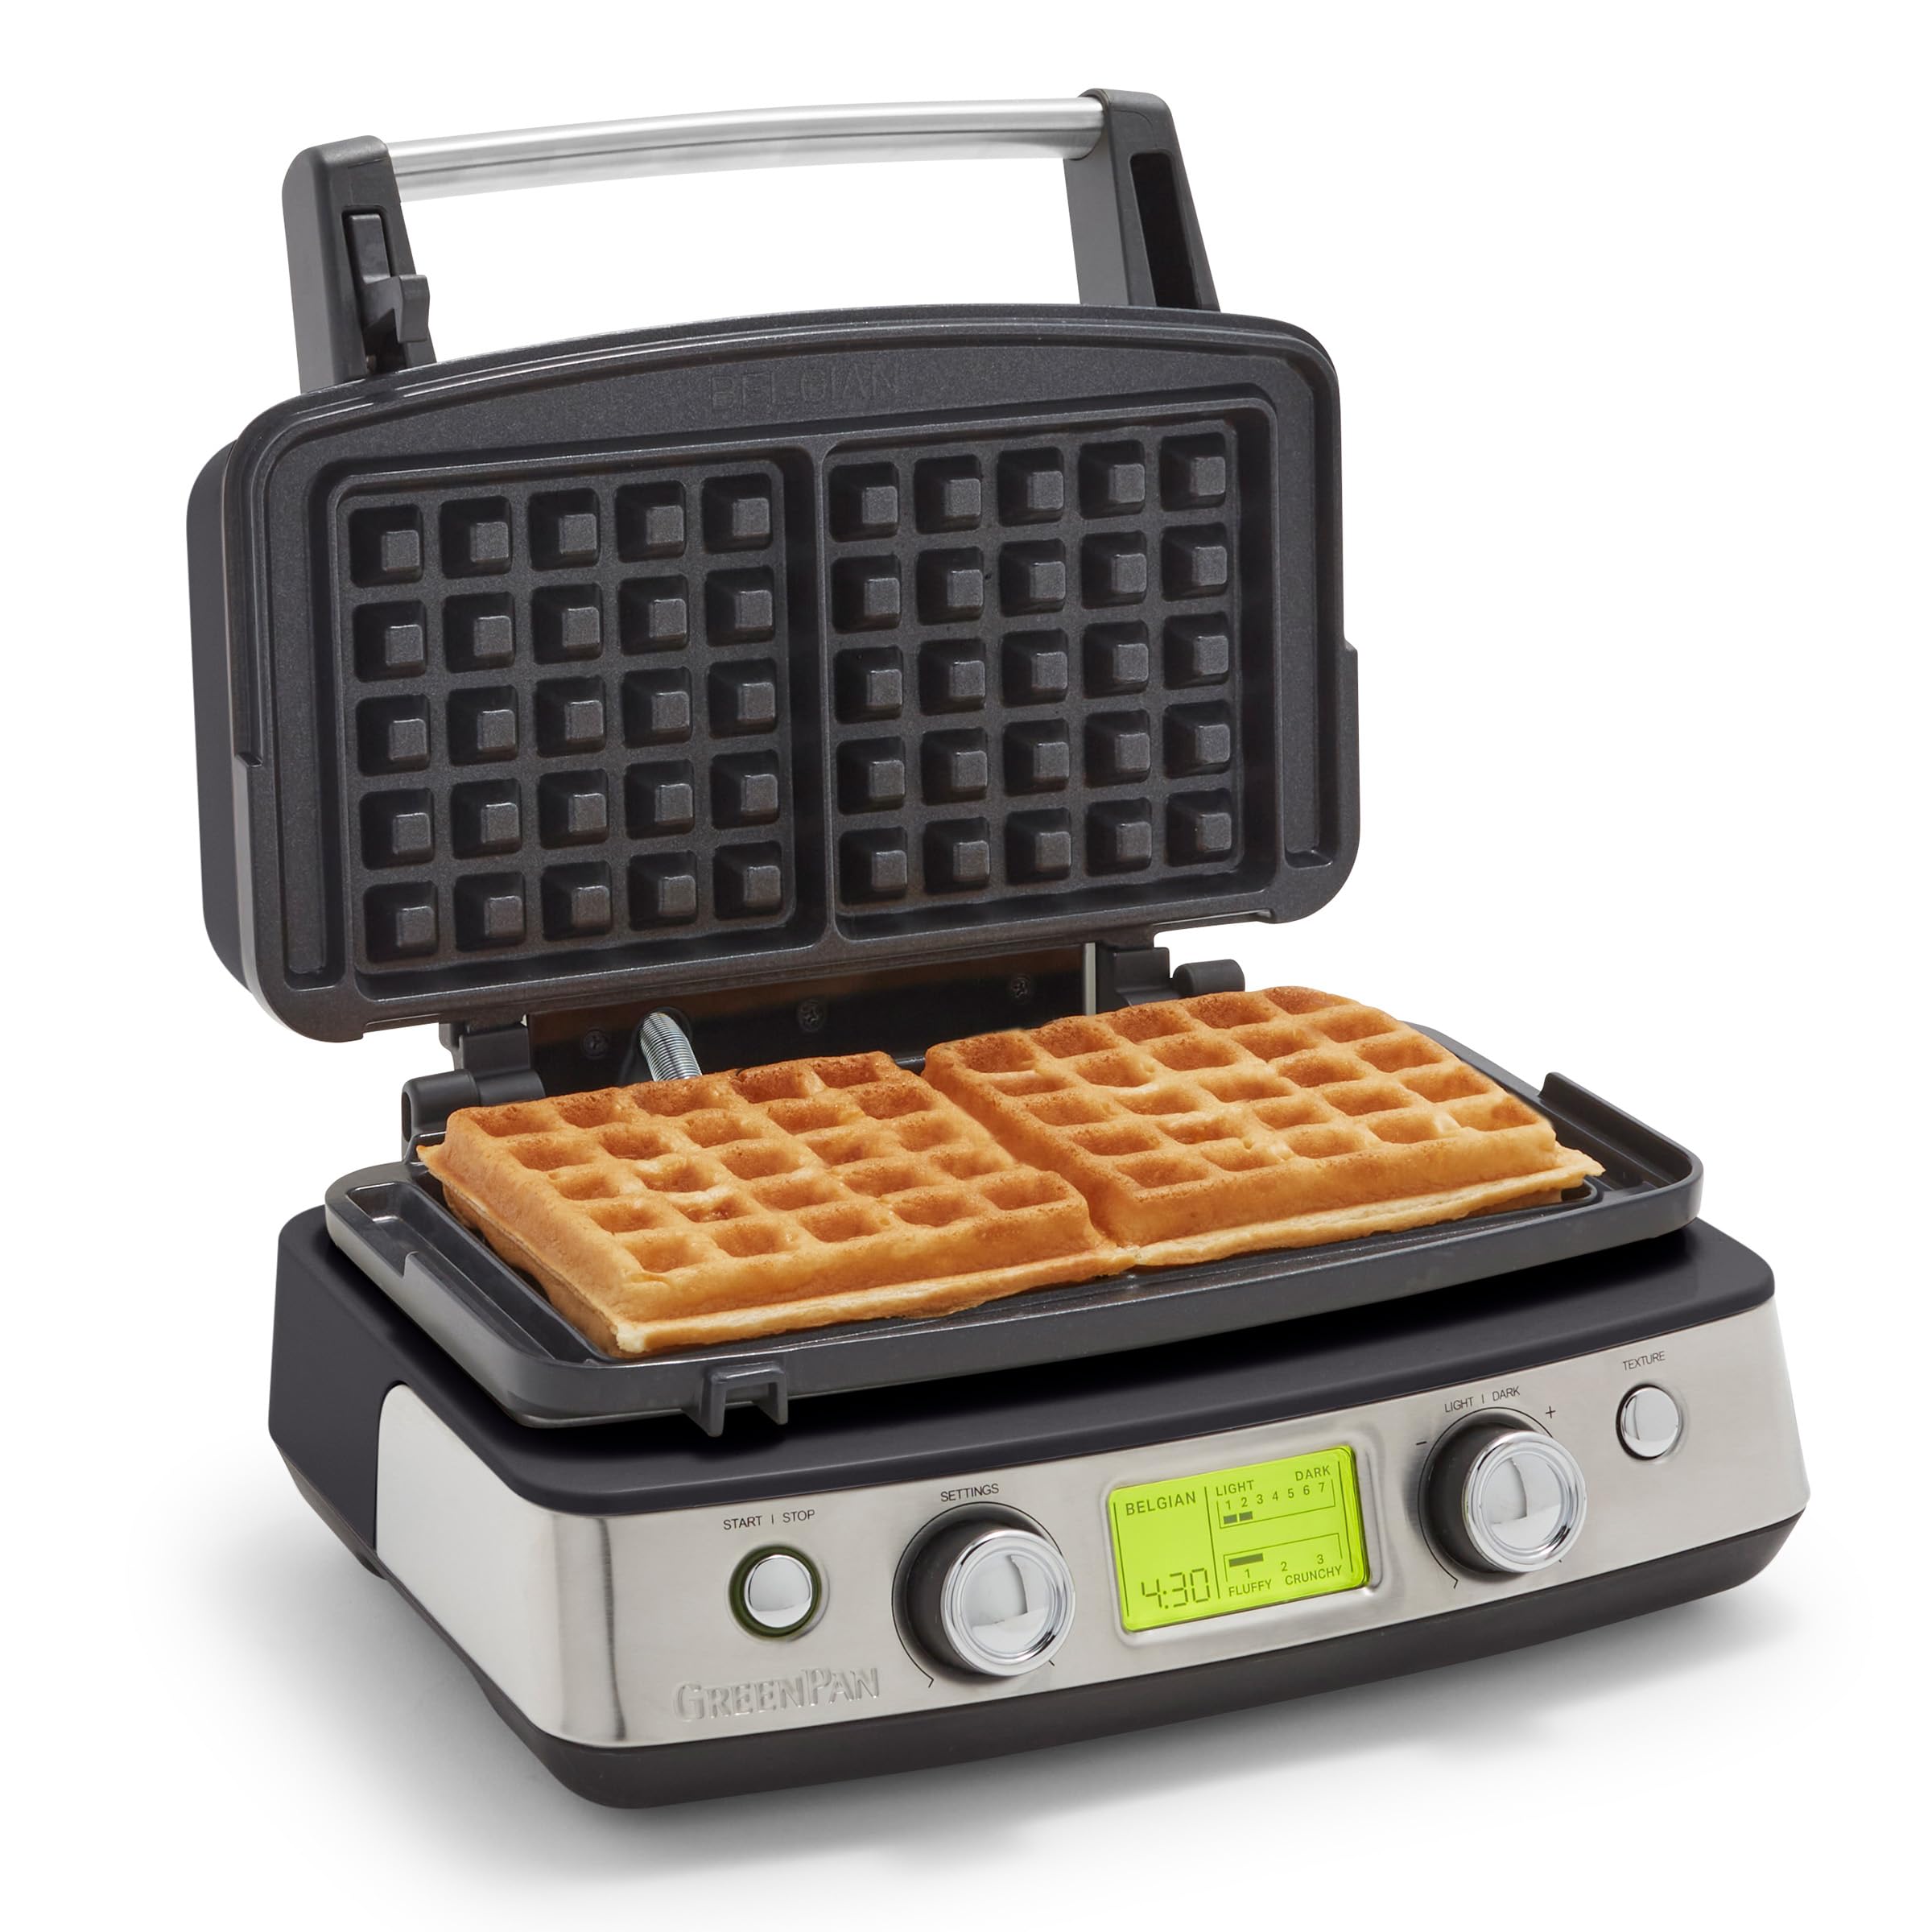 GreenPan Elite 2-Square Belgian & Classic Waffle Iron, Healthy Ceramic Nonstick Aluminum Dishwasher Safe Plates, Adjustable Shade/Crunch Controls, Wont Overflow, Easy Cleanup Breakfast, Black